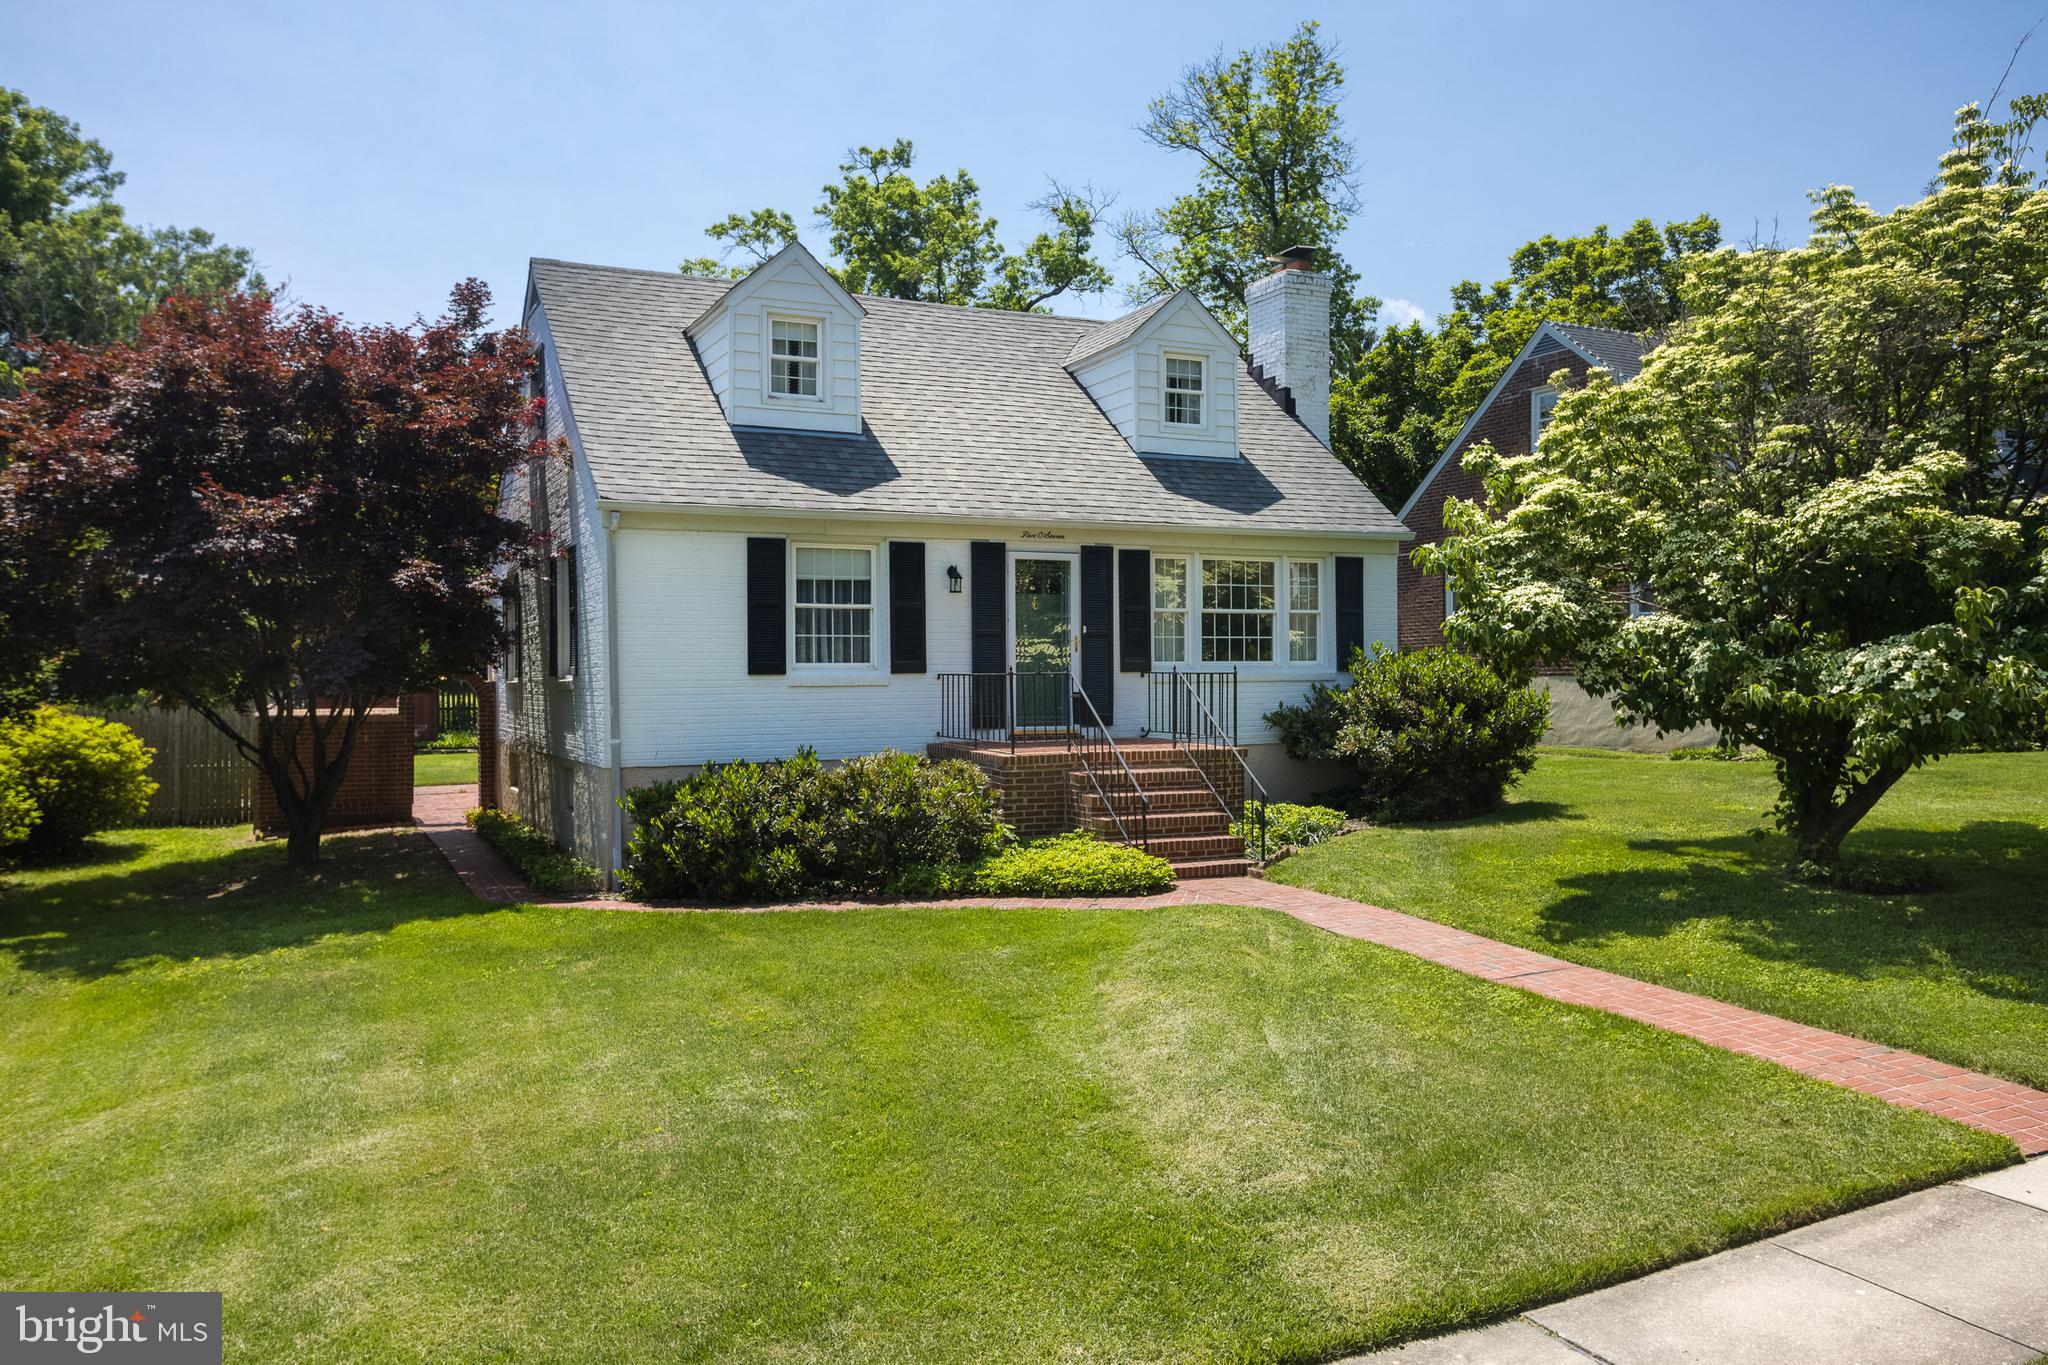 Welcome to 507 Holden, a four-bedroom and two-full bath cape cod in the lovely Towson neighborhood, 